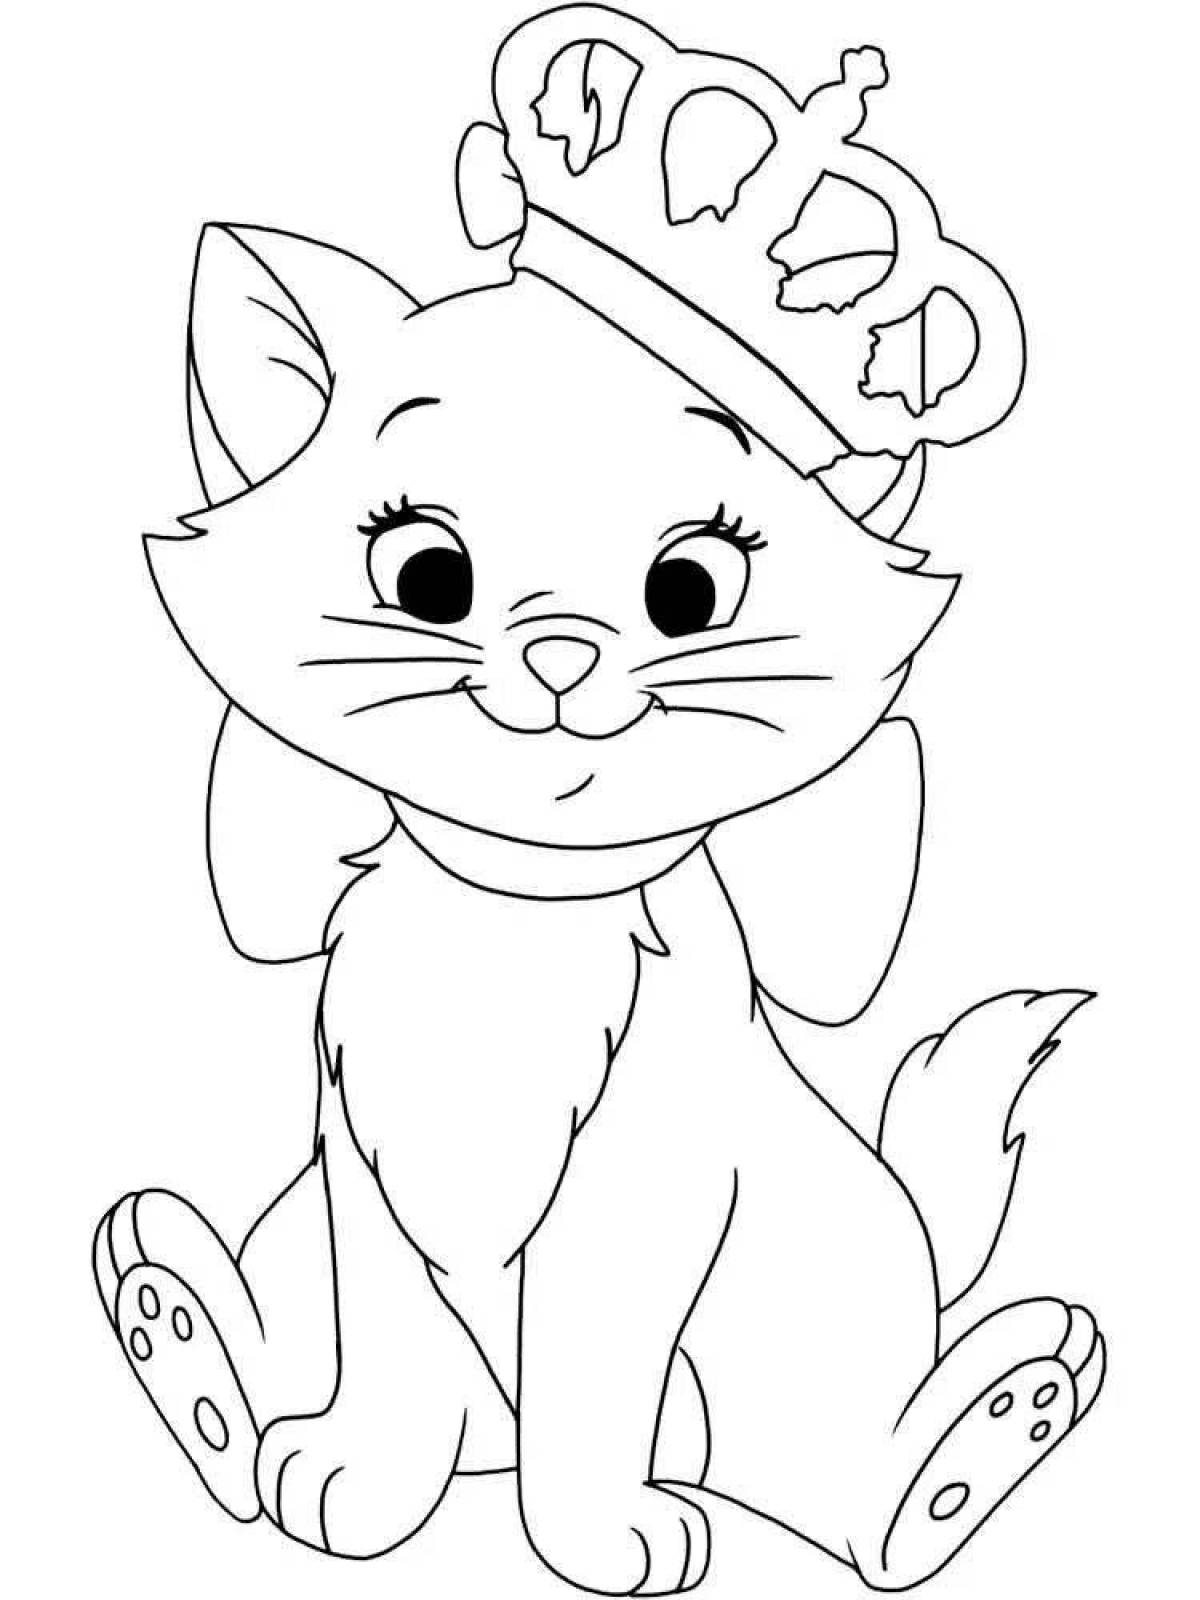 Glorious marie kitty coloring page